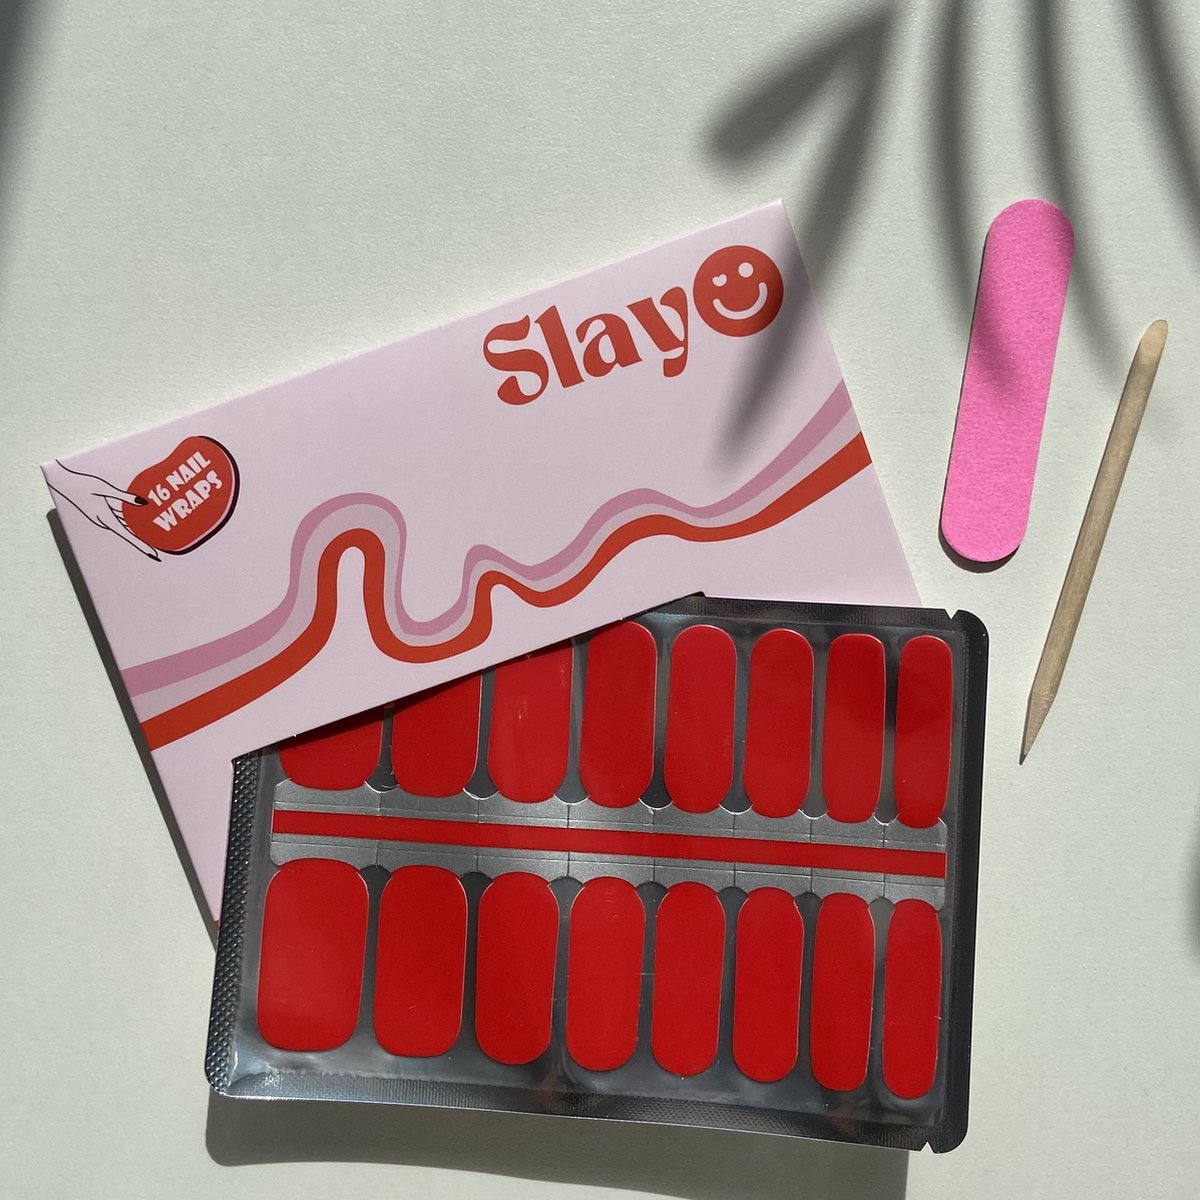 Slayo© - Nagelstickers - Romantic Red - Nail Wraps - Nagel Stickers - Nail Art - GEEN lamp nodig - Rode Nagels